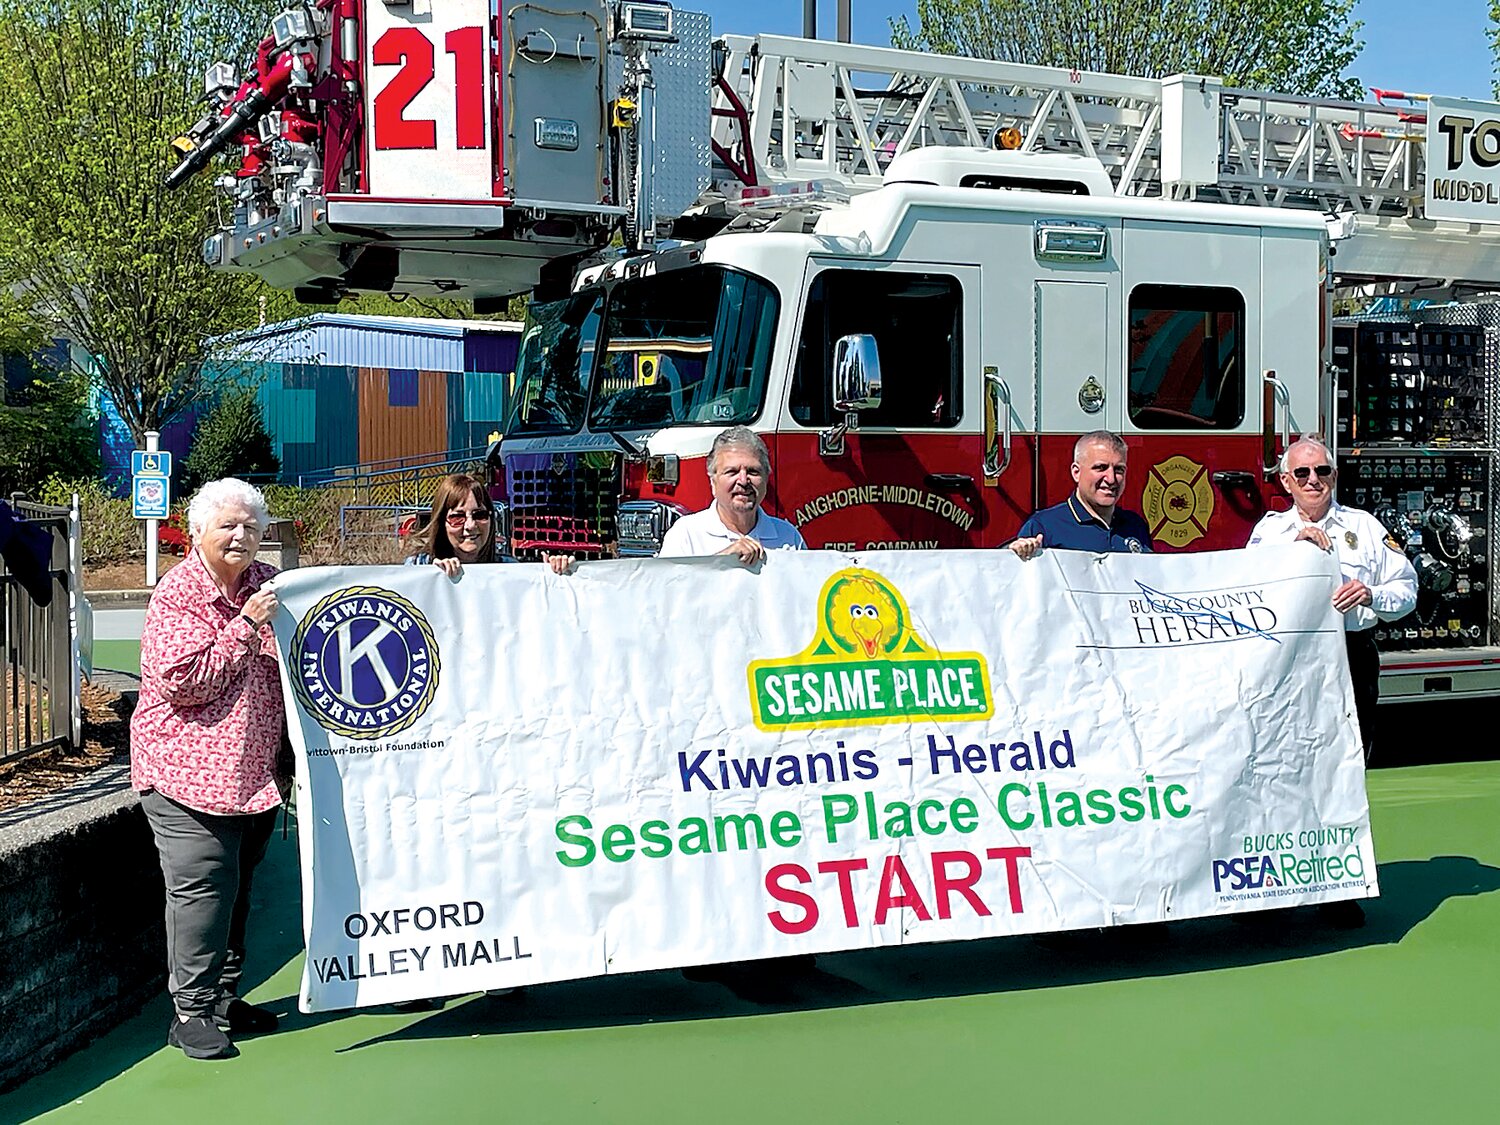 On your mark, get set, go to the 23rd annual Kiwanis-Herald Sesame Place Classic on Sunday, May 21. Included in the festivities will be an appearance by the Langhorne-Middletown Fire Company and its chief, Frank Farry (fourth from left). Also on hand this past Friday at the park to display the Start/Finish banner were, from left, Kiwanis Club’s Dixie Rhodes, Sesame Sprint Director Rose McIver, Bucks County Herald’s Ernie Nocito and Langhorne-Middletown Fire Police’s Larry Harvey.